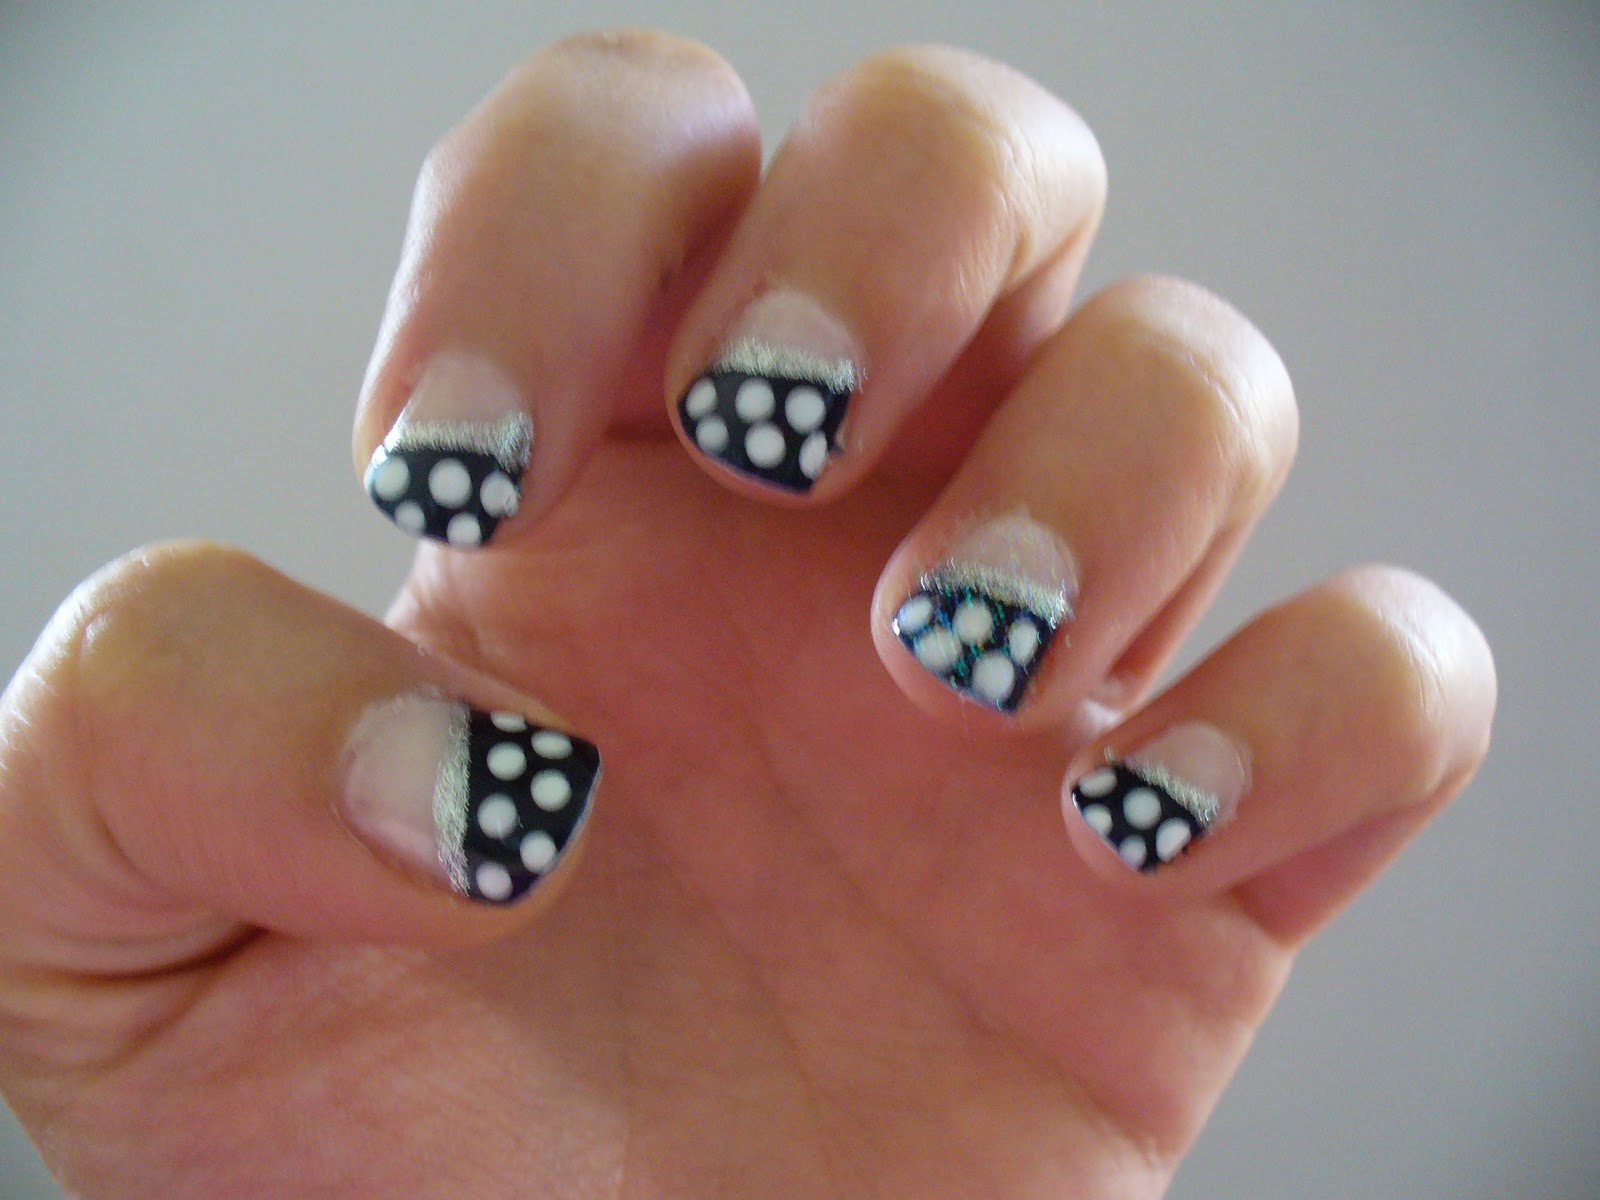 3. Cute and Simple Nail Art for Short Nails - wide 2